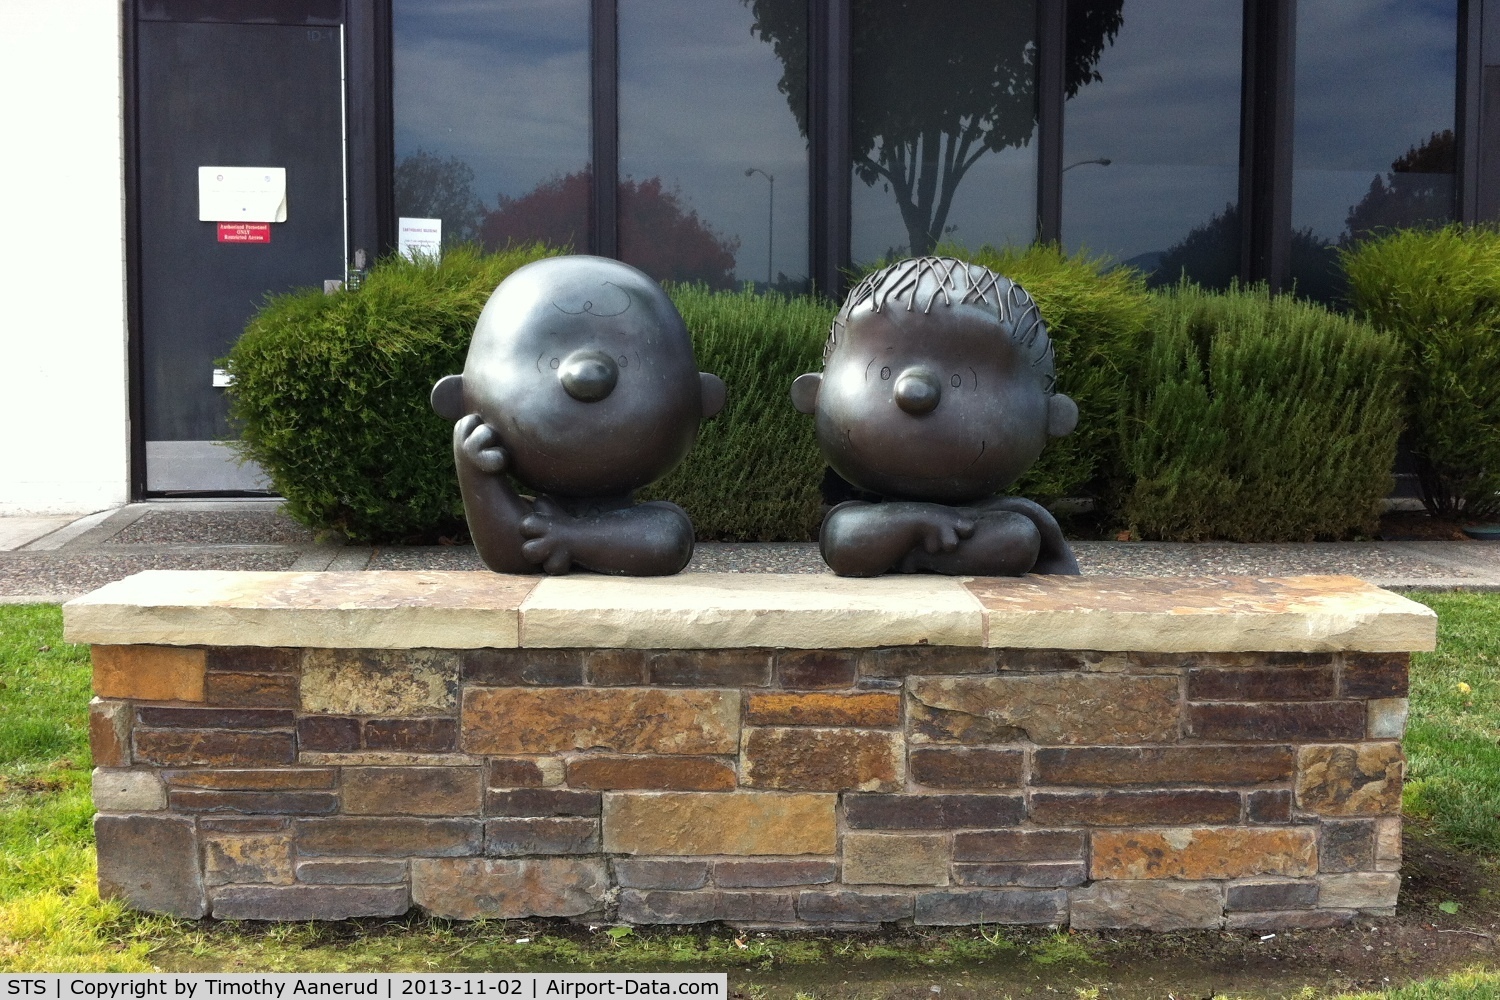 Charles M. Schulz - Sonoma County Airport (STS) - Charlie and Linus outside, in front of the terminal building